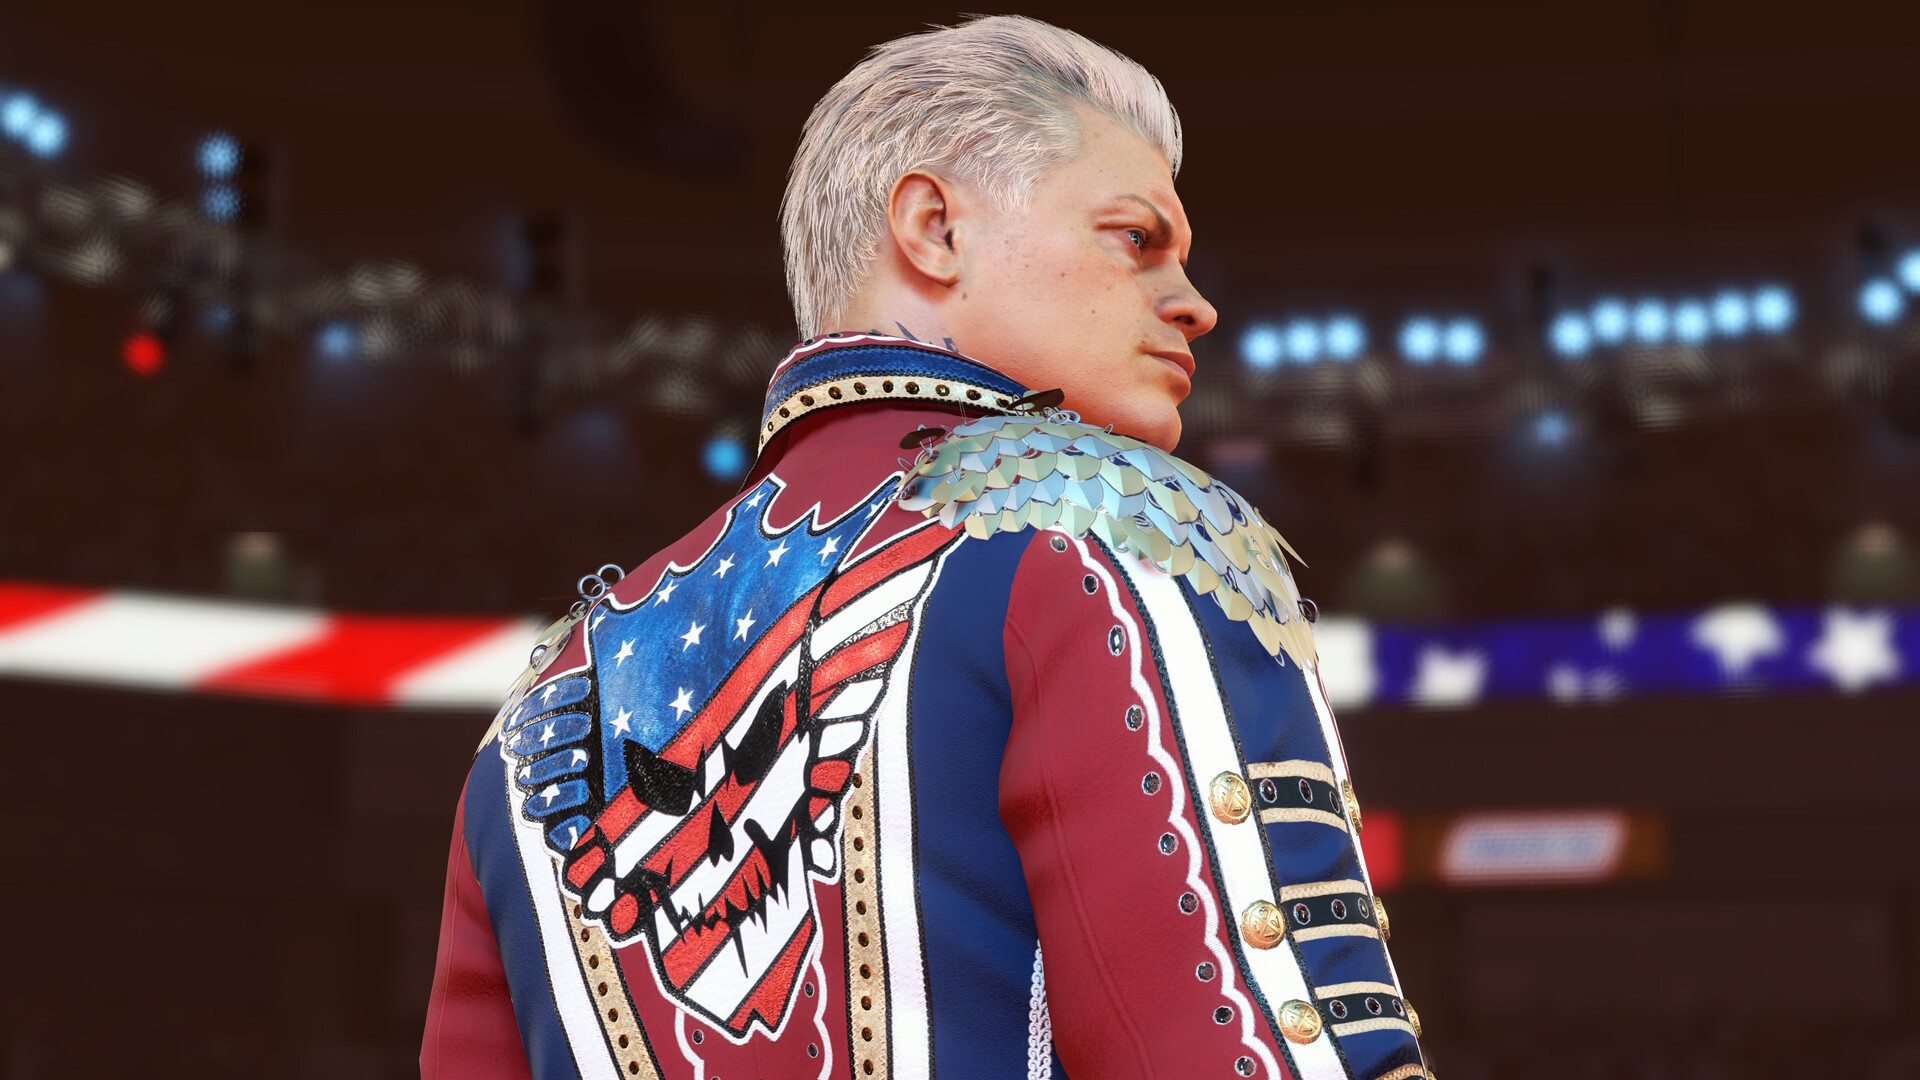 WWE 2K22 Day One Update 1.04 Includes Crashing Fixes & More